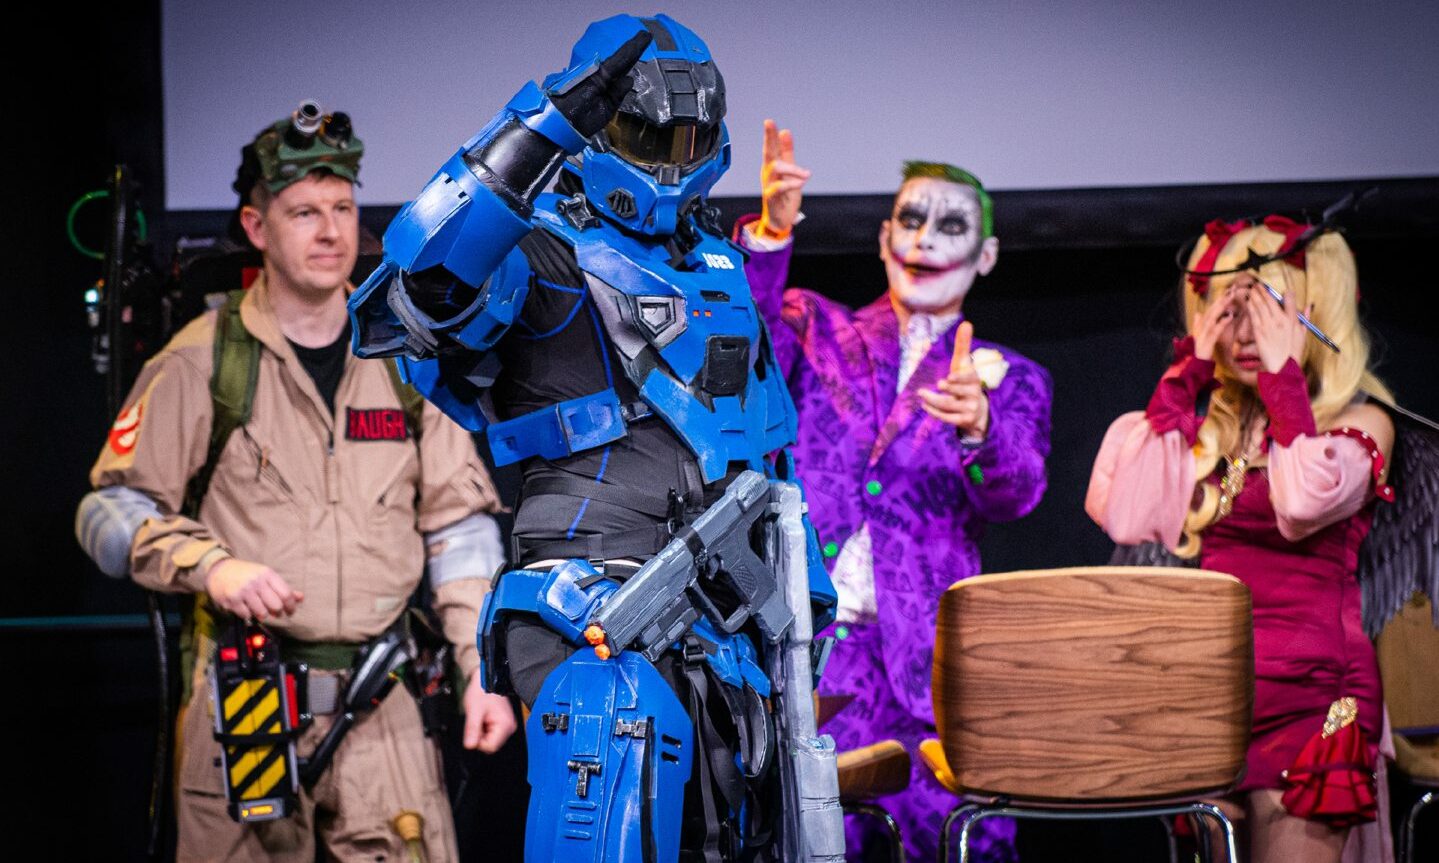 Cosplayers on stage, a Ghostbuster, Halo character, the Joker and an anime character.